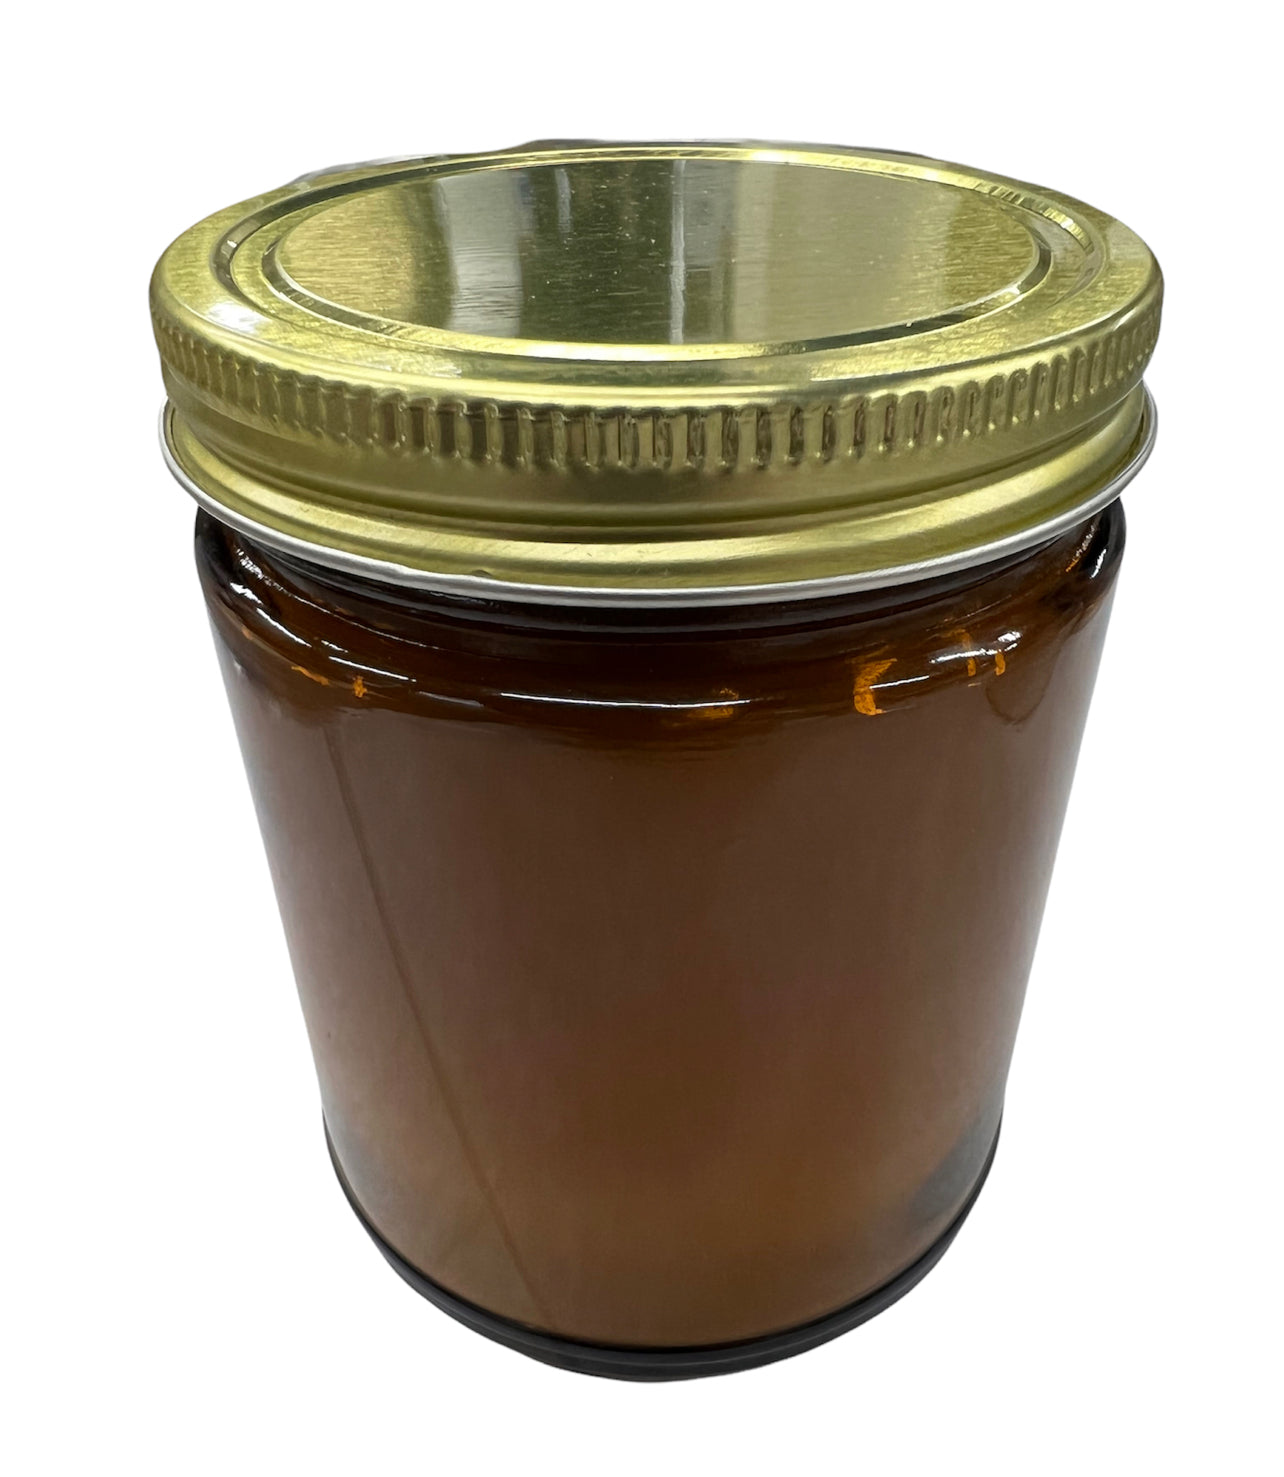 Private Label Candles - 9 oz Amber Apothecary Jar